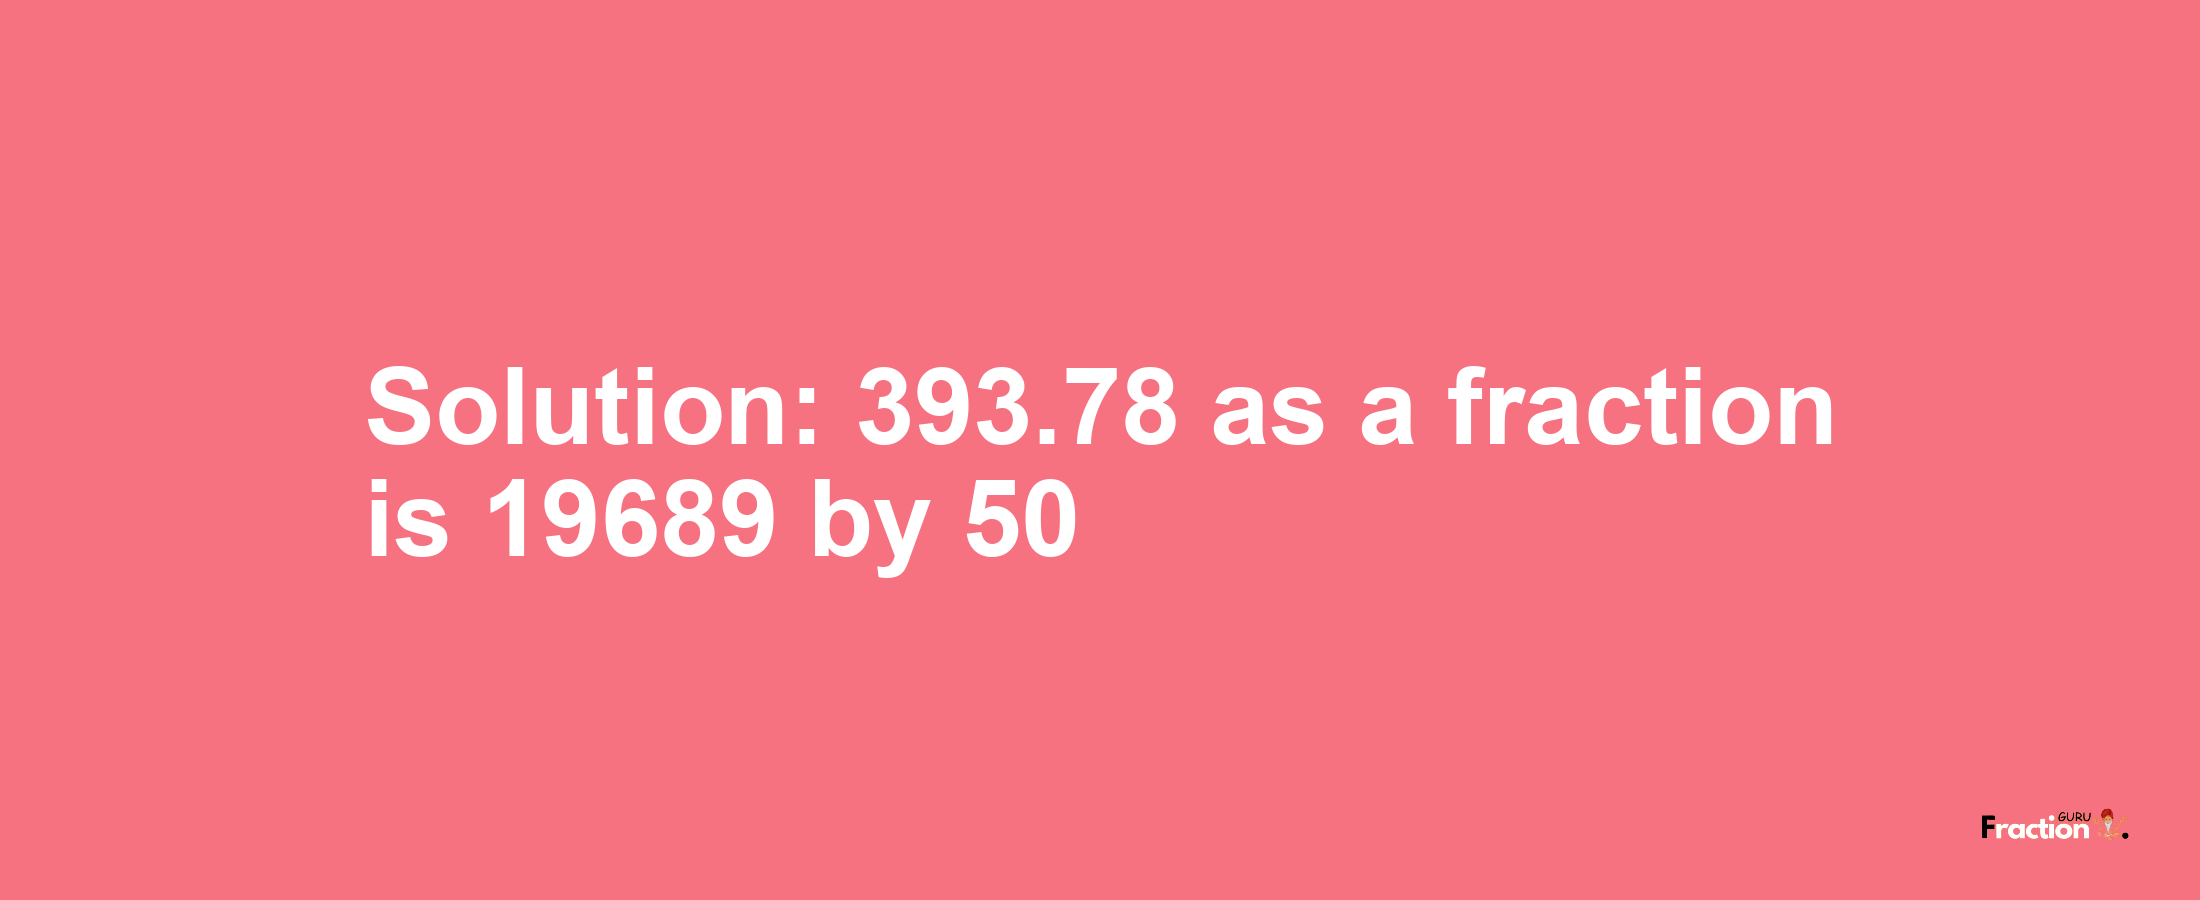 Solution:393.78 as a fraction is 19689/50